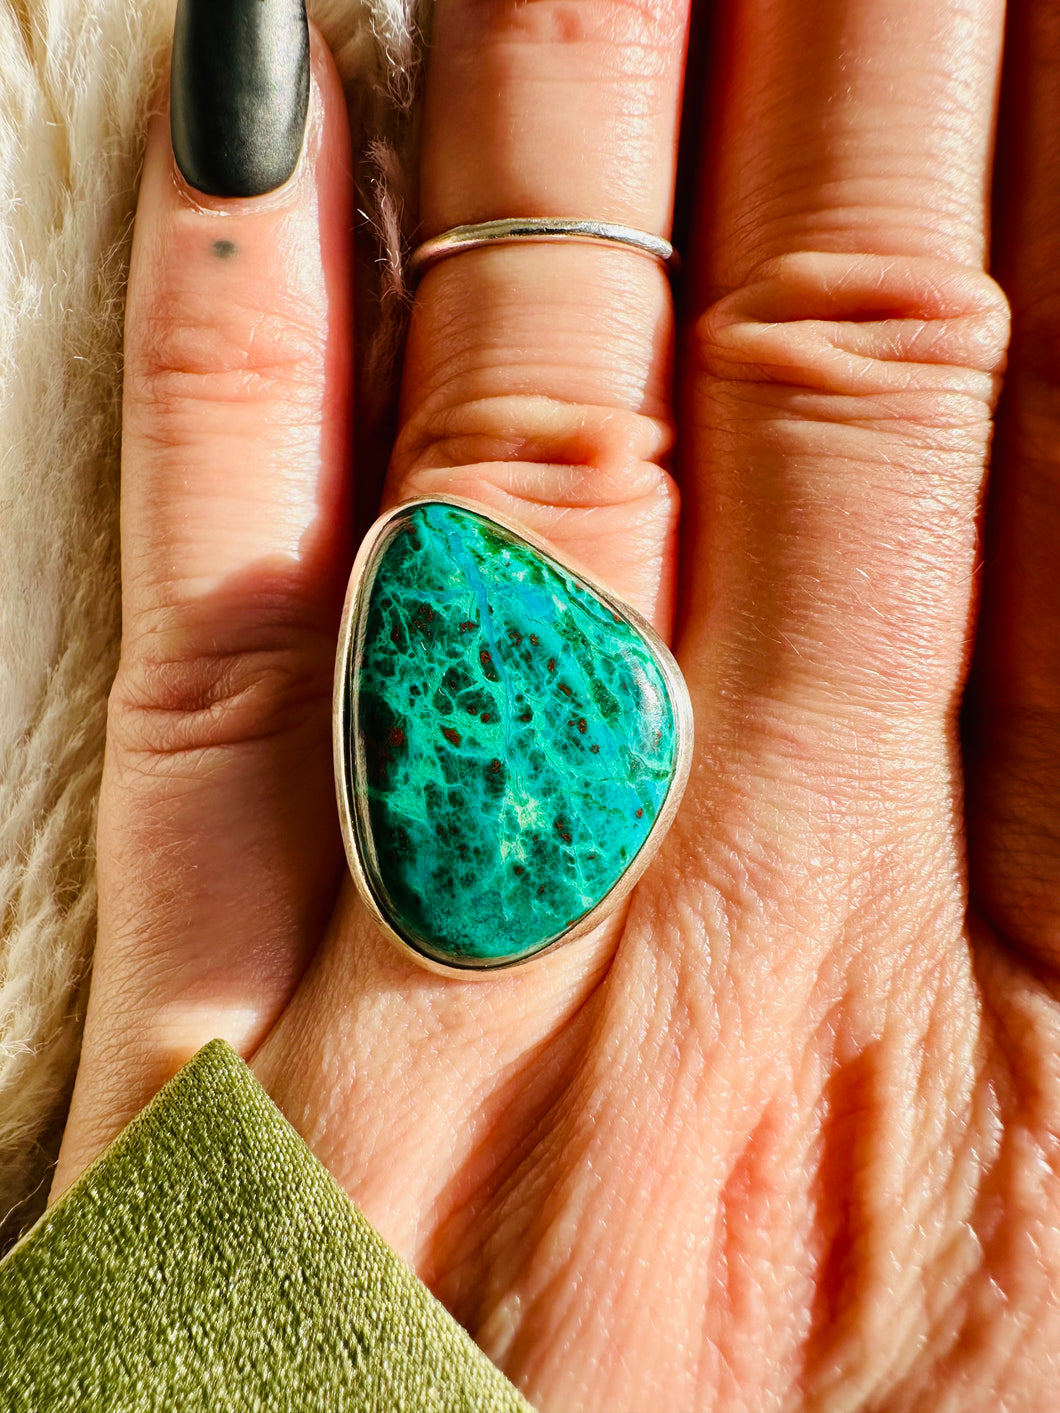 Handmade & Sterling Silver Rings Collection - Green Chrysocolla